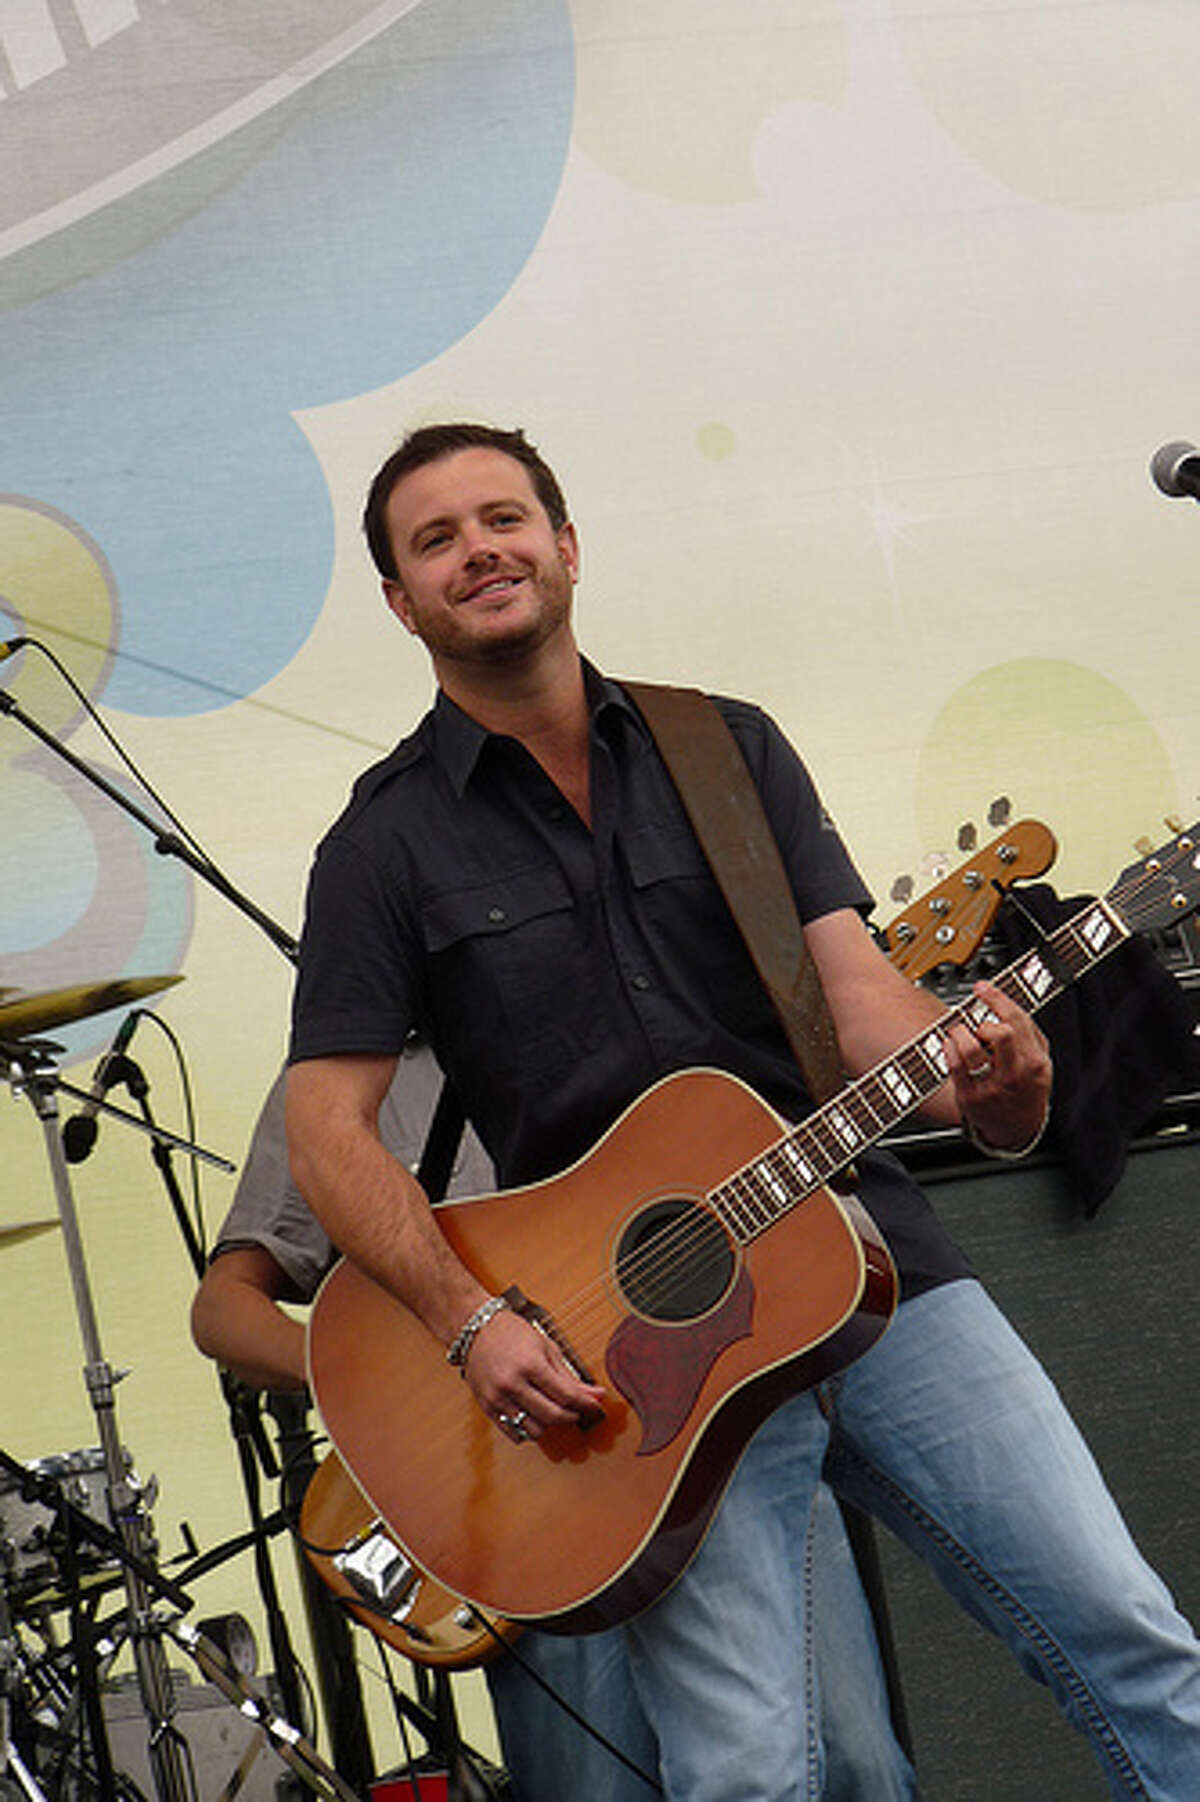 Tall City Memorial Stair Climb concert is set for 4 p.m. Saturday. The concert features Wade Bowen, the Stateline Band, Electric Gypsies. The cost for the concert only is $35.